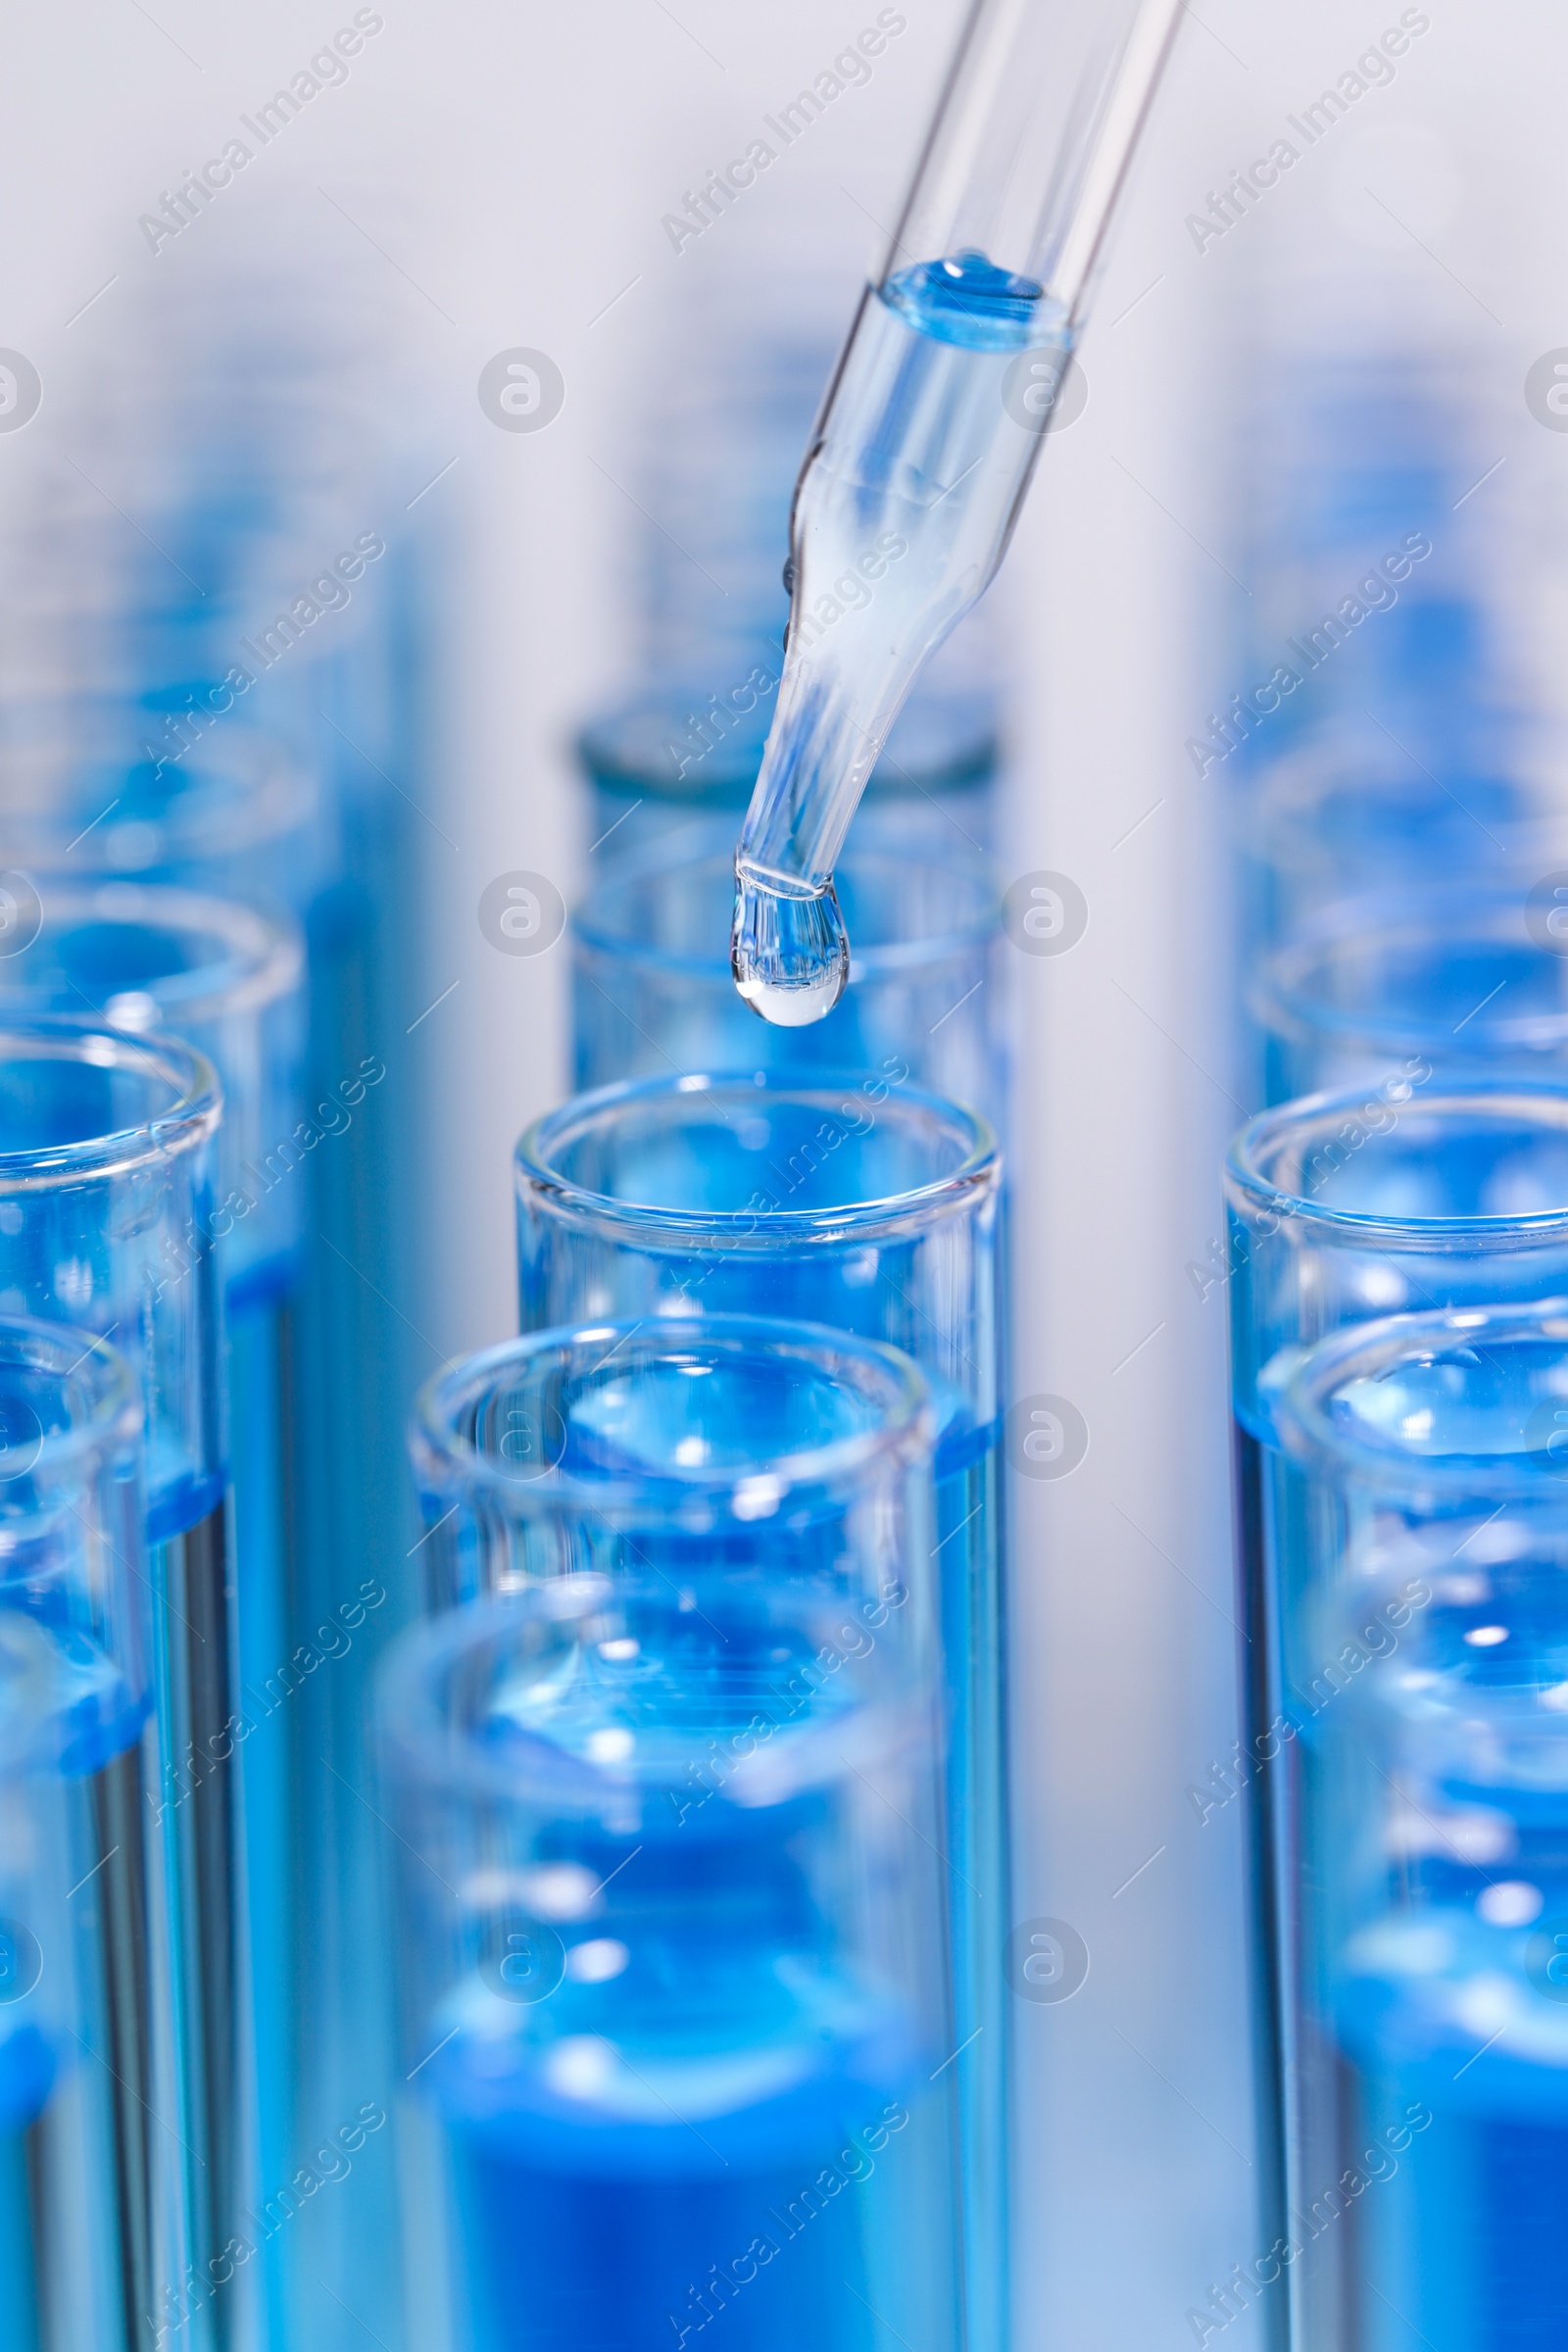 Photo of Dripping reagent into test tube with blue liquid on light background, closeup. Laboratory analysis